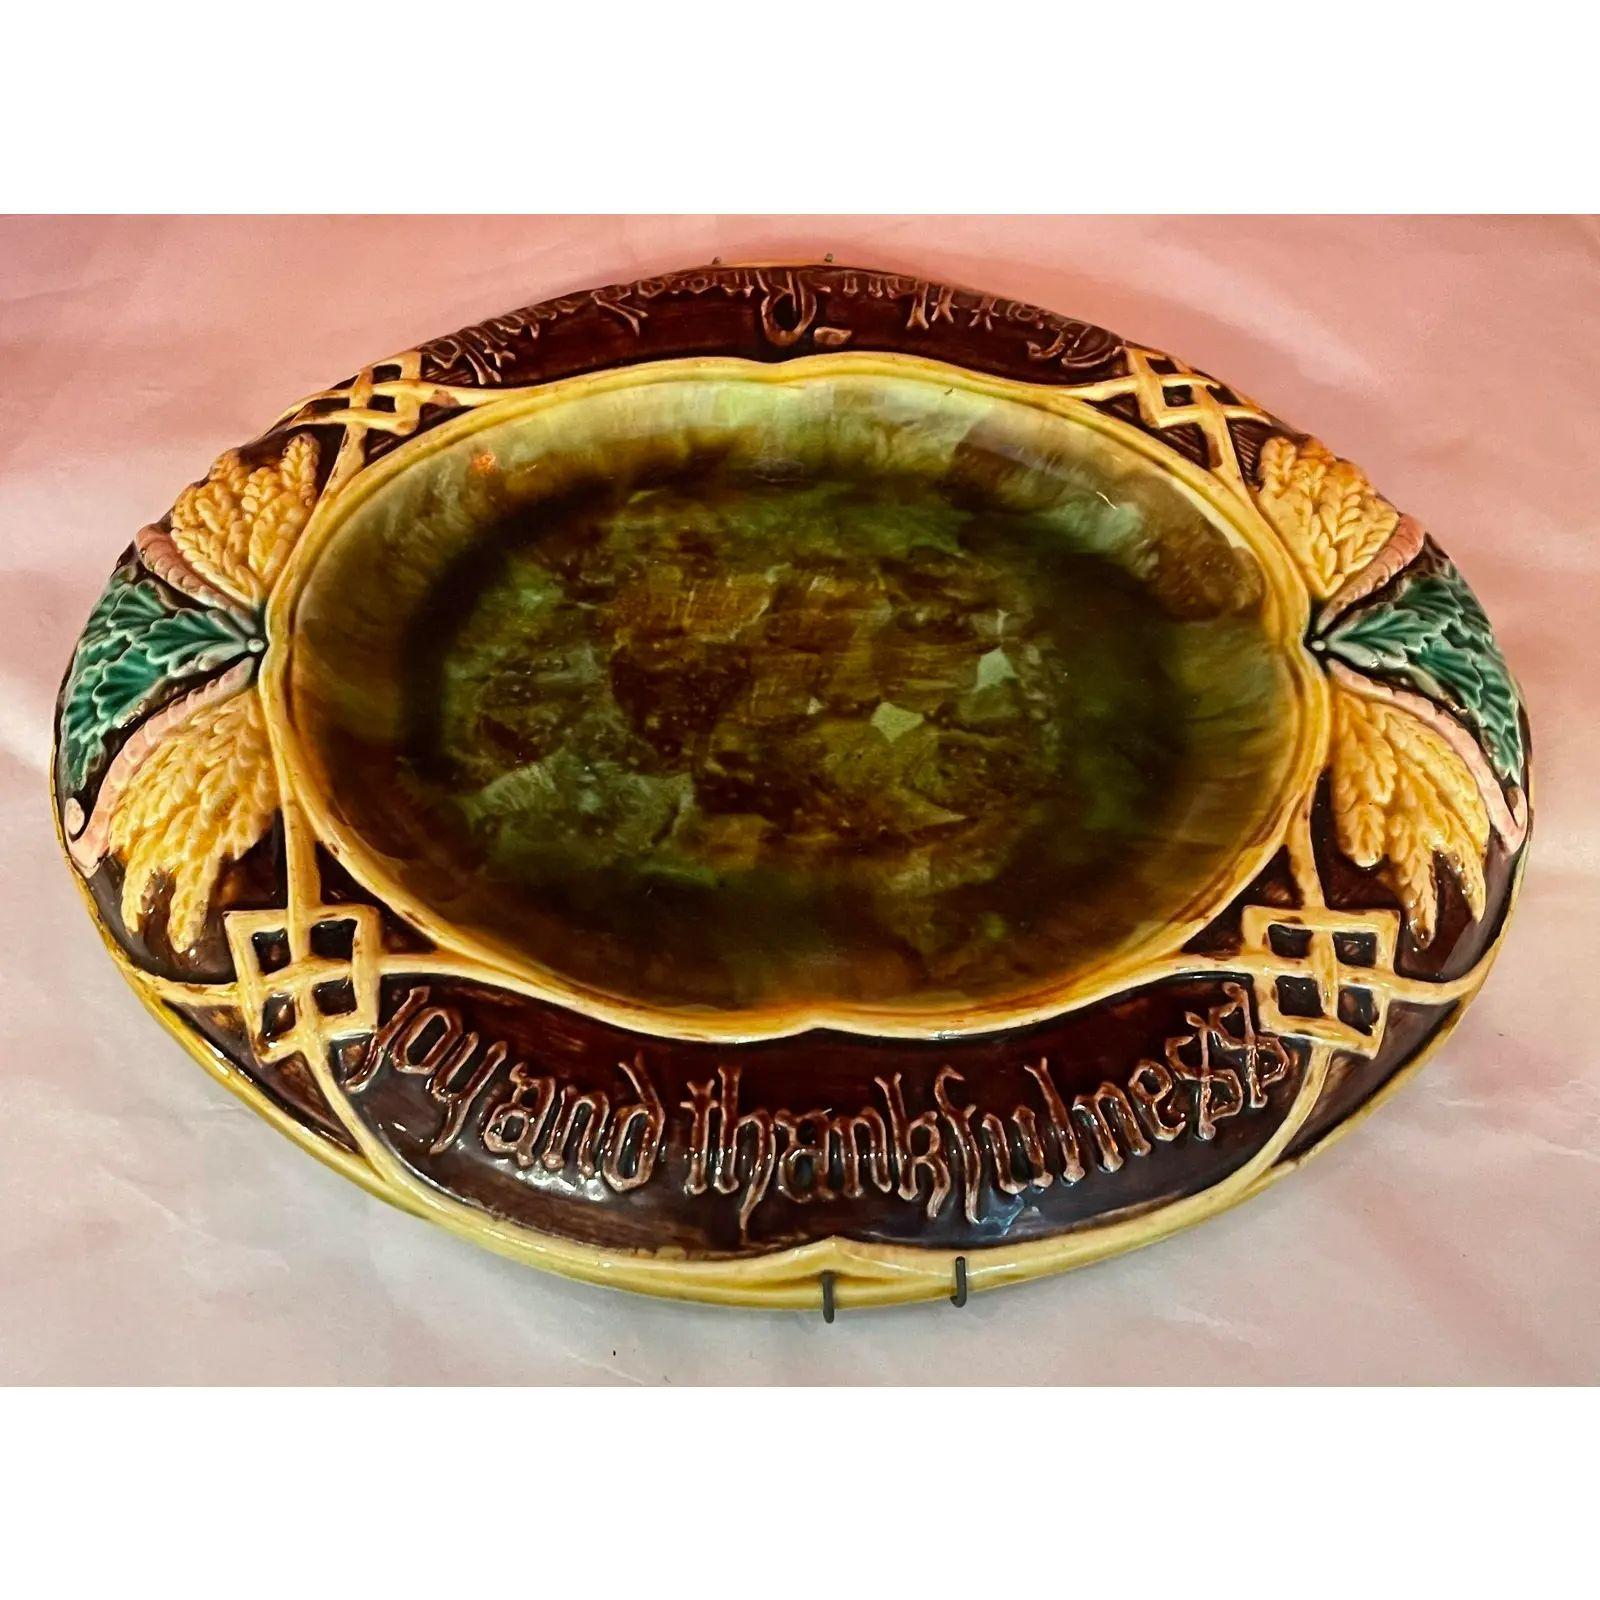 Antique 19th C English Majolica Bread Tray. It would make a fabulous holiday gift as it reads “Eat Thy Bread With Joy & Thankfulness”.

Additional information: 
Materials: Pottery
Color: Brown
Period: 19th Century
Styles: English
Item Type: Vintage,